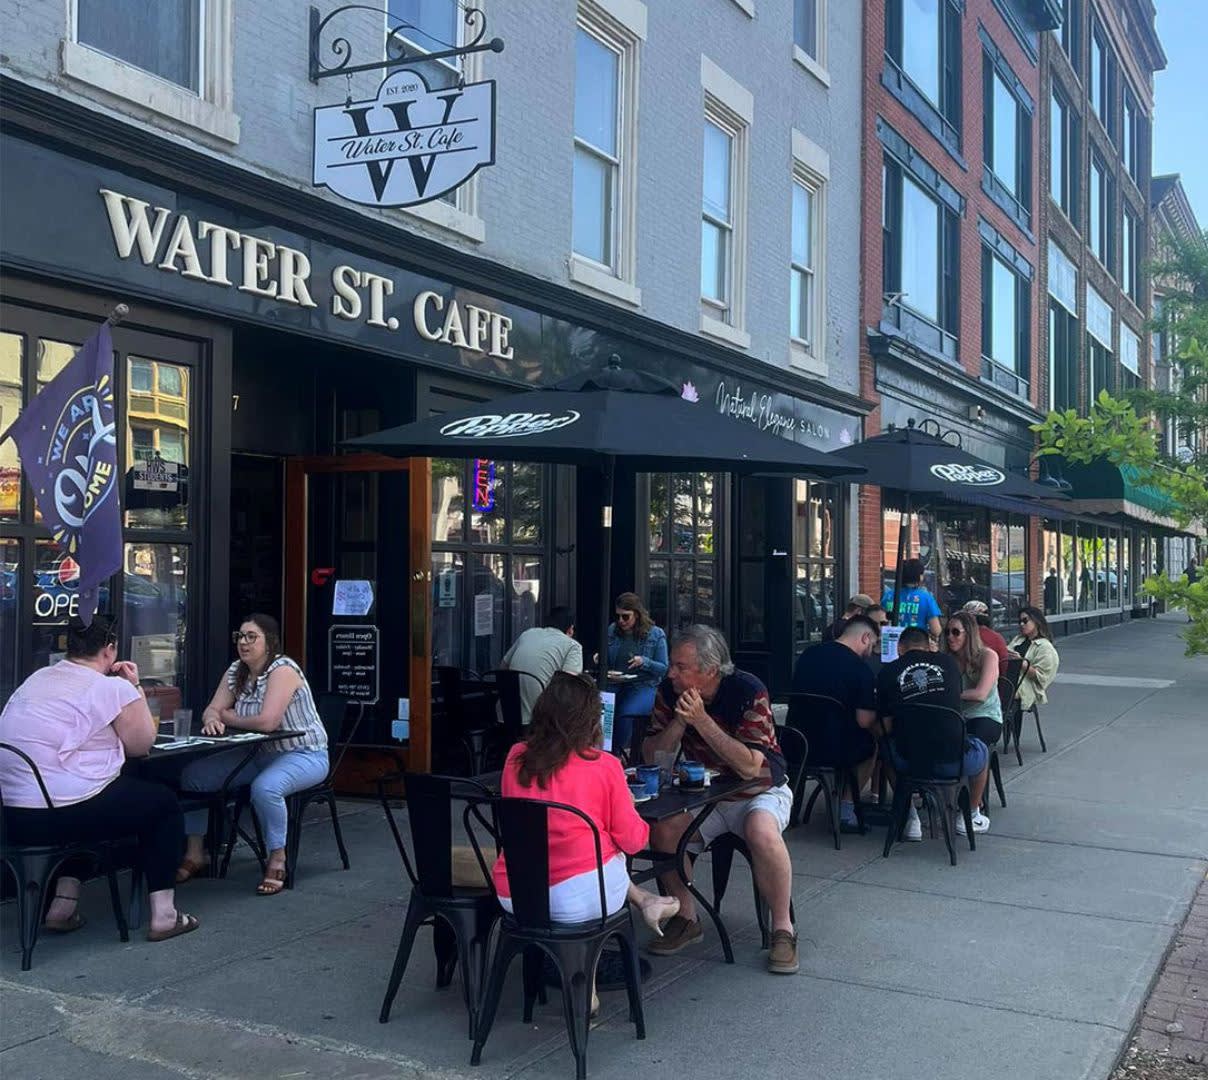 Exterior of Water St. Cafe